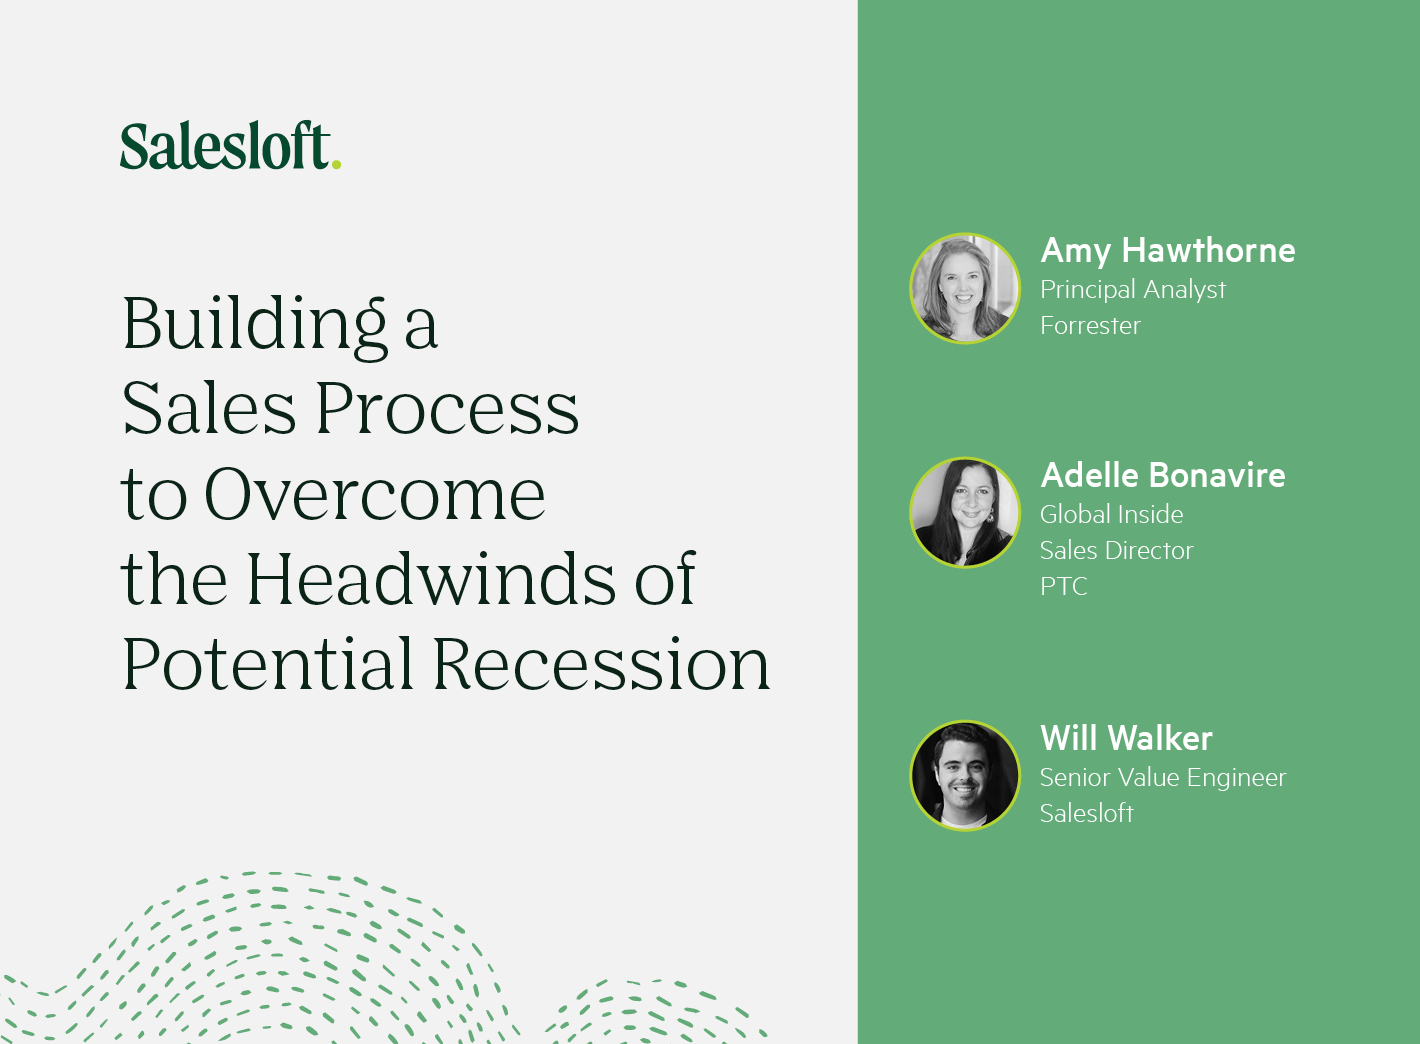 Building a Sales Process to Overcome the Headwinds of Potential Recession